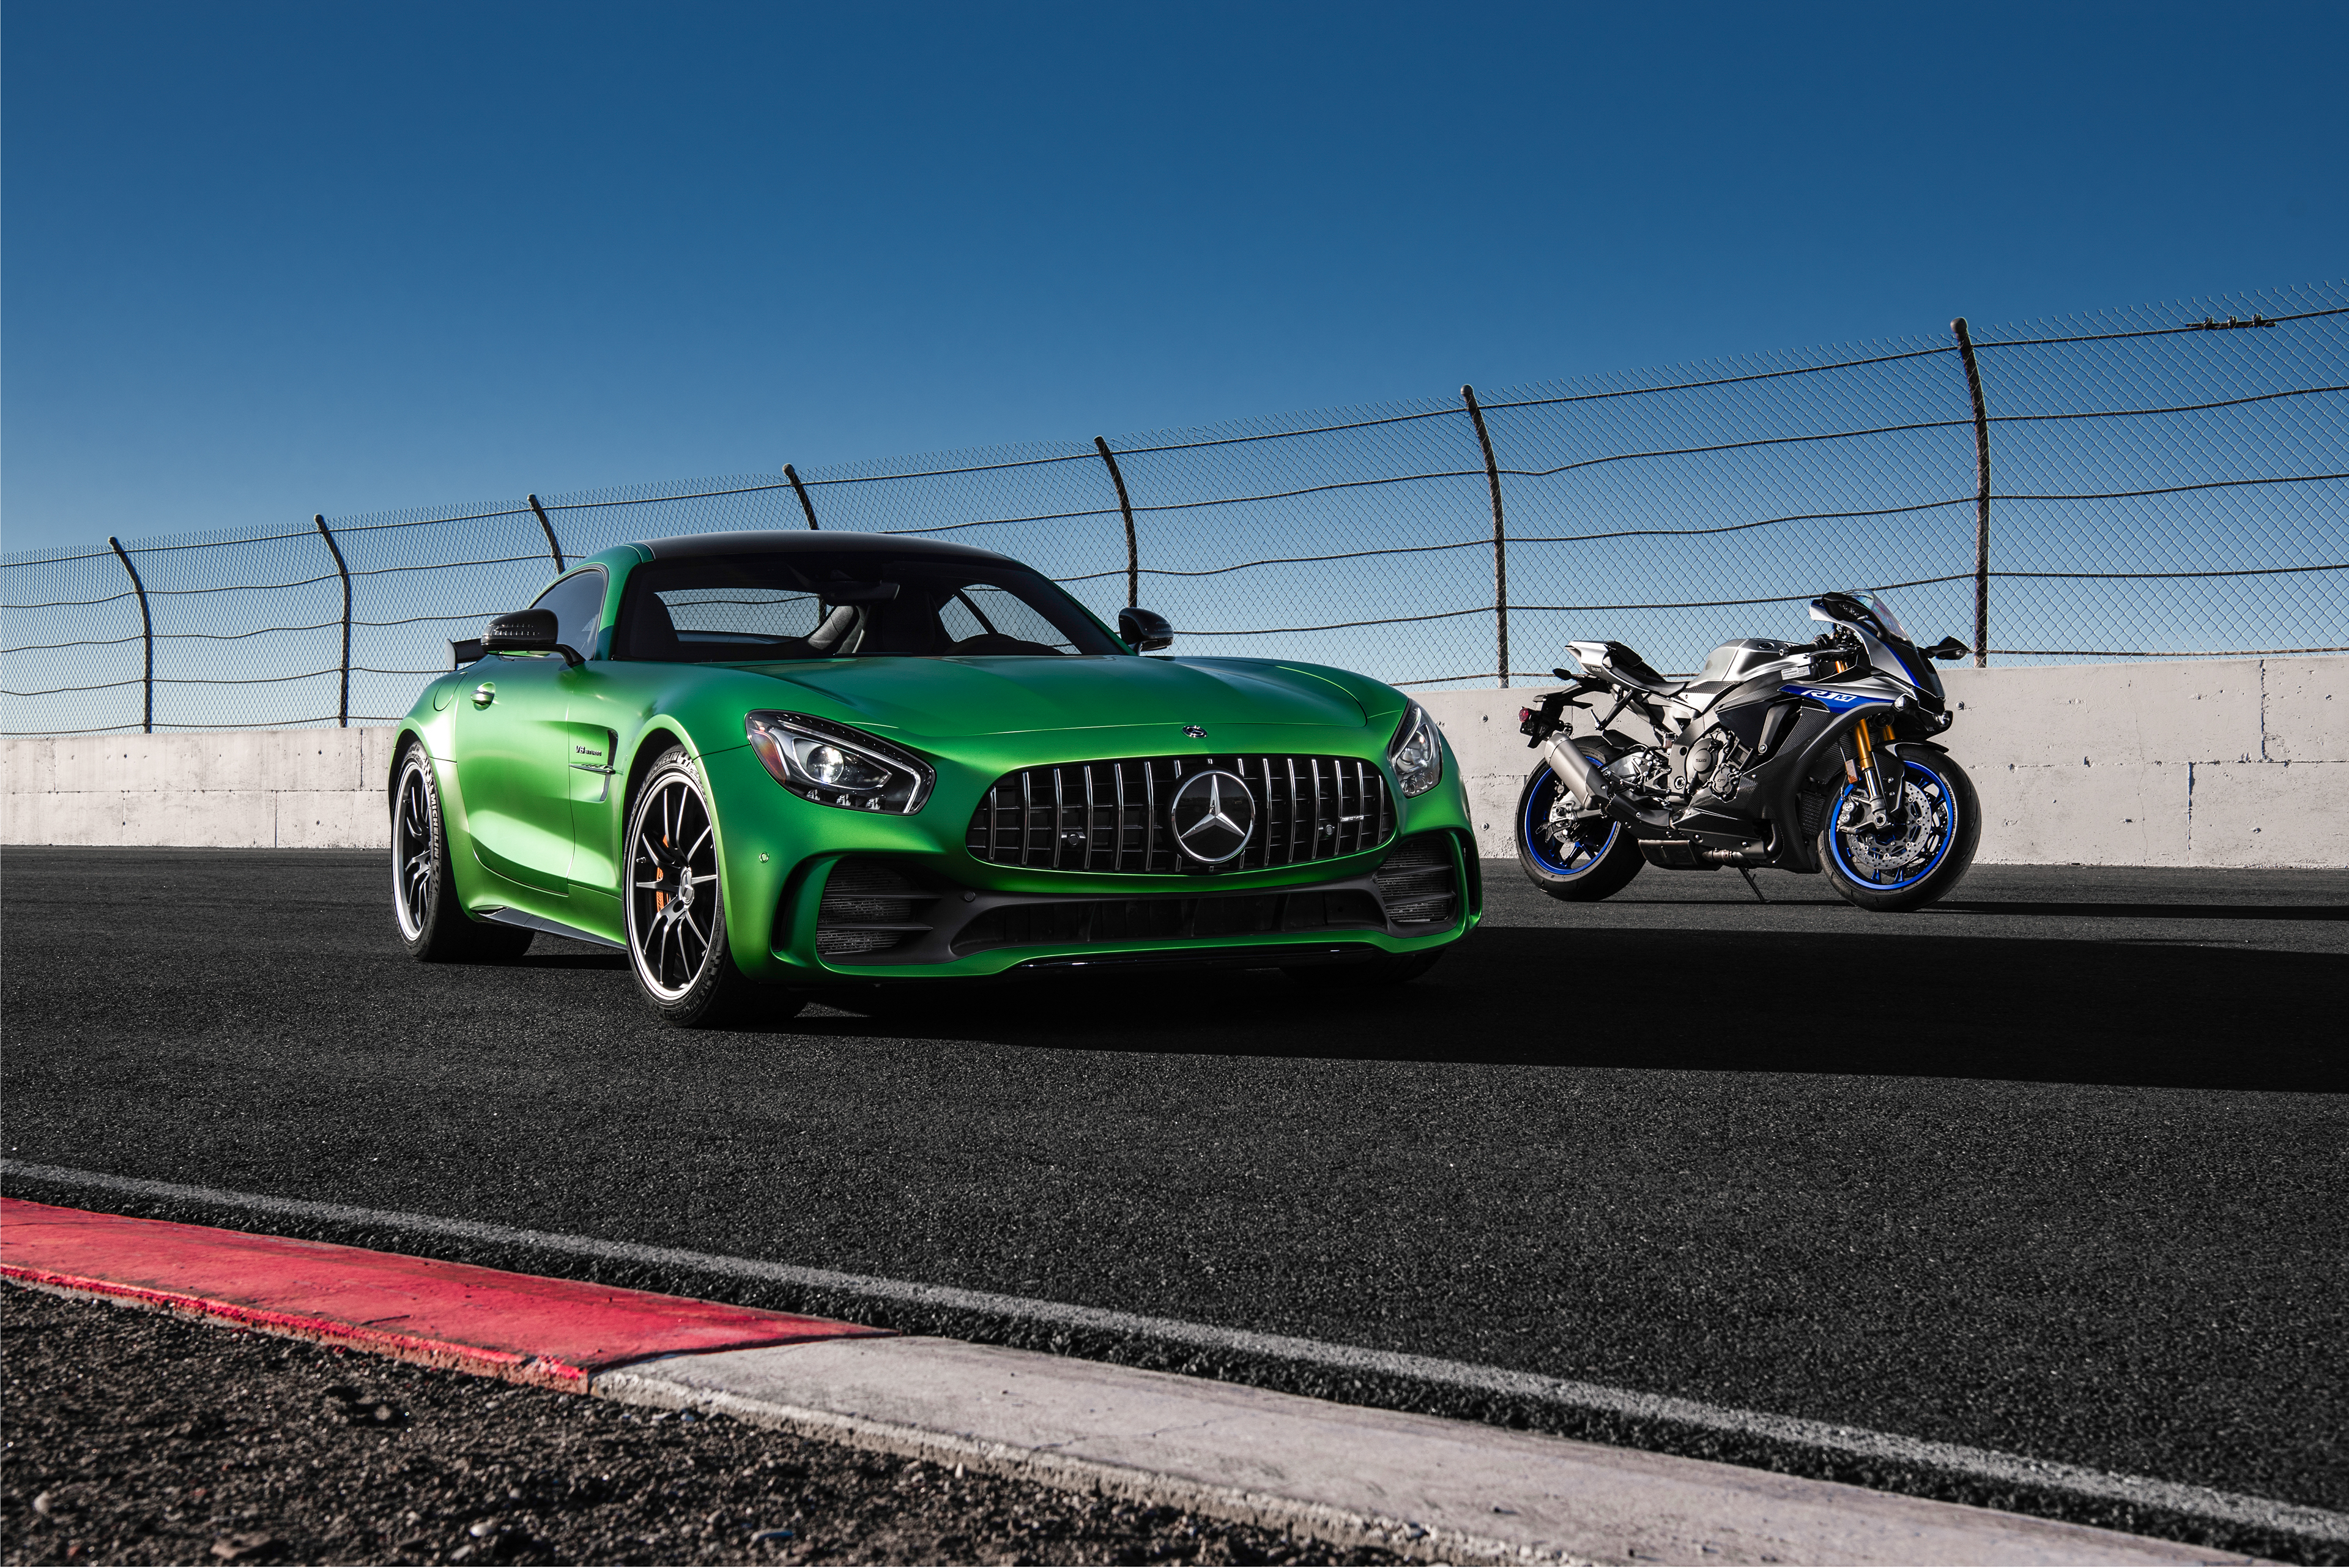 Wallpapers Mercedes Benz cars motorcycles on the desktop